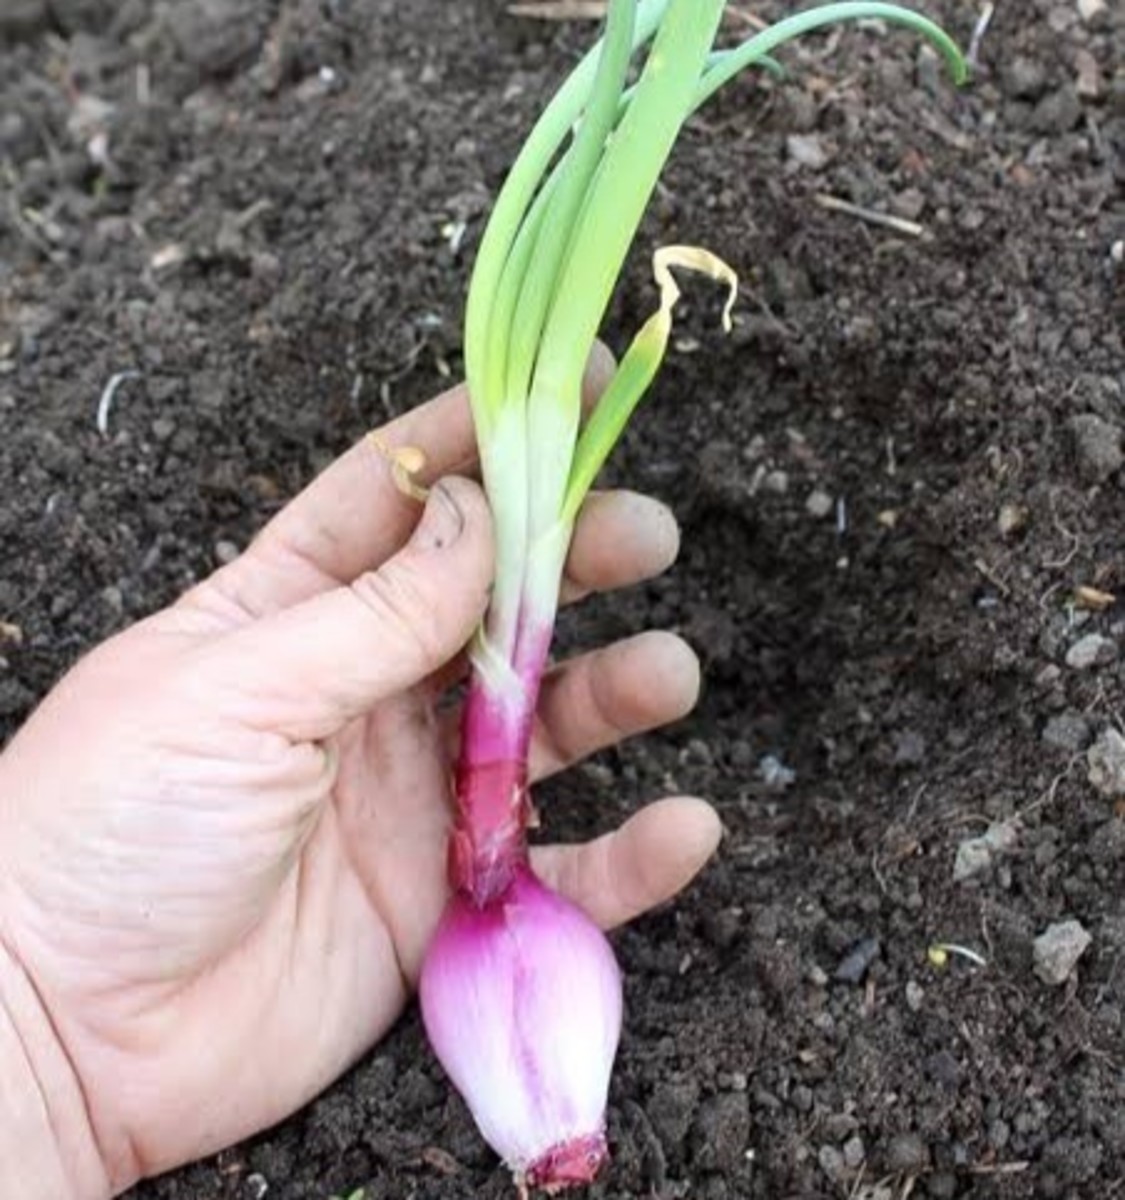 Plant this sprouting onion in soil to grow it.